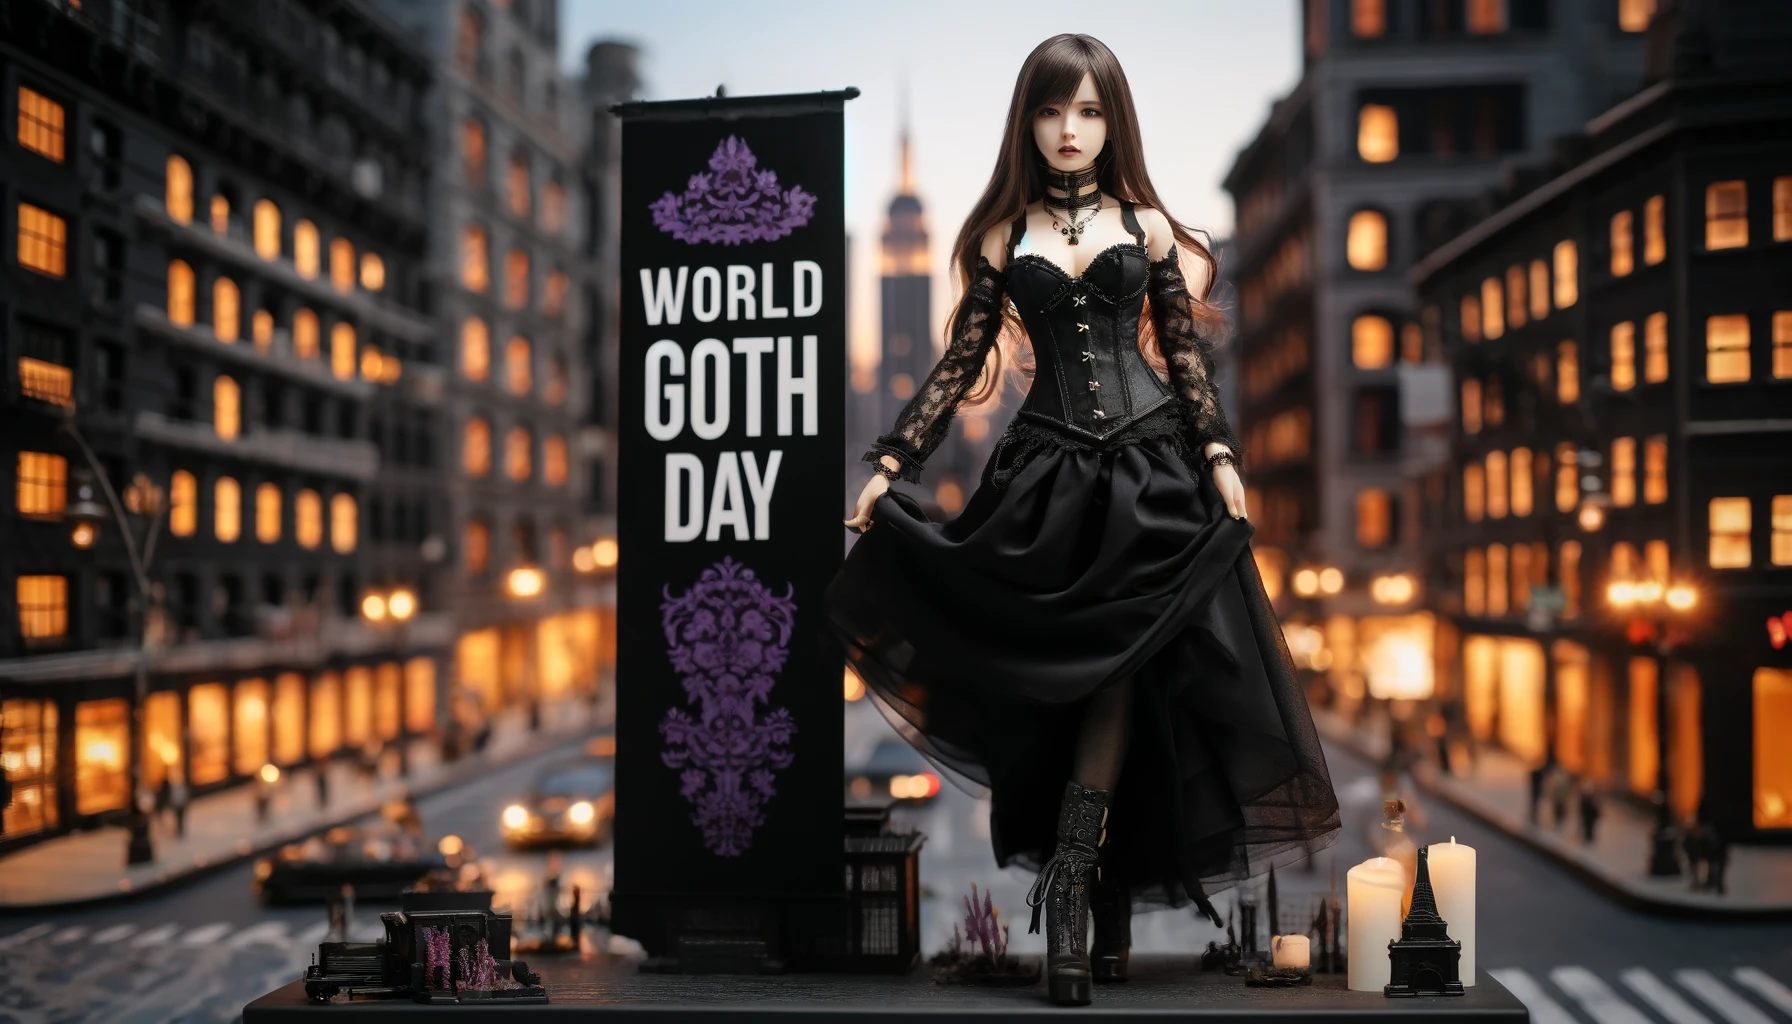 Inspirational World Goth Day Messages for All